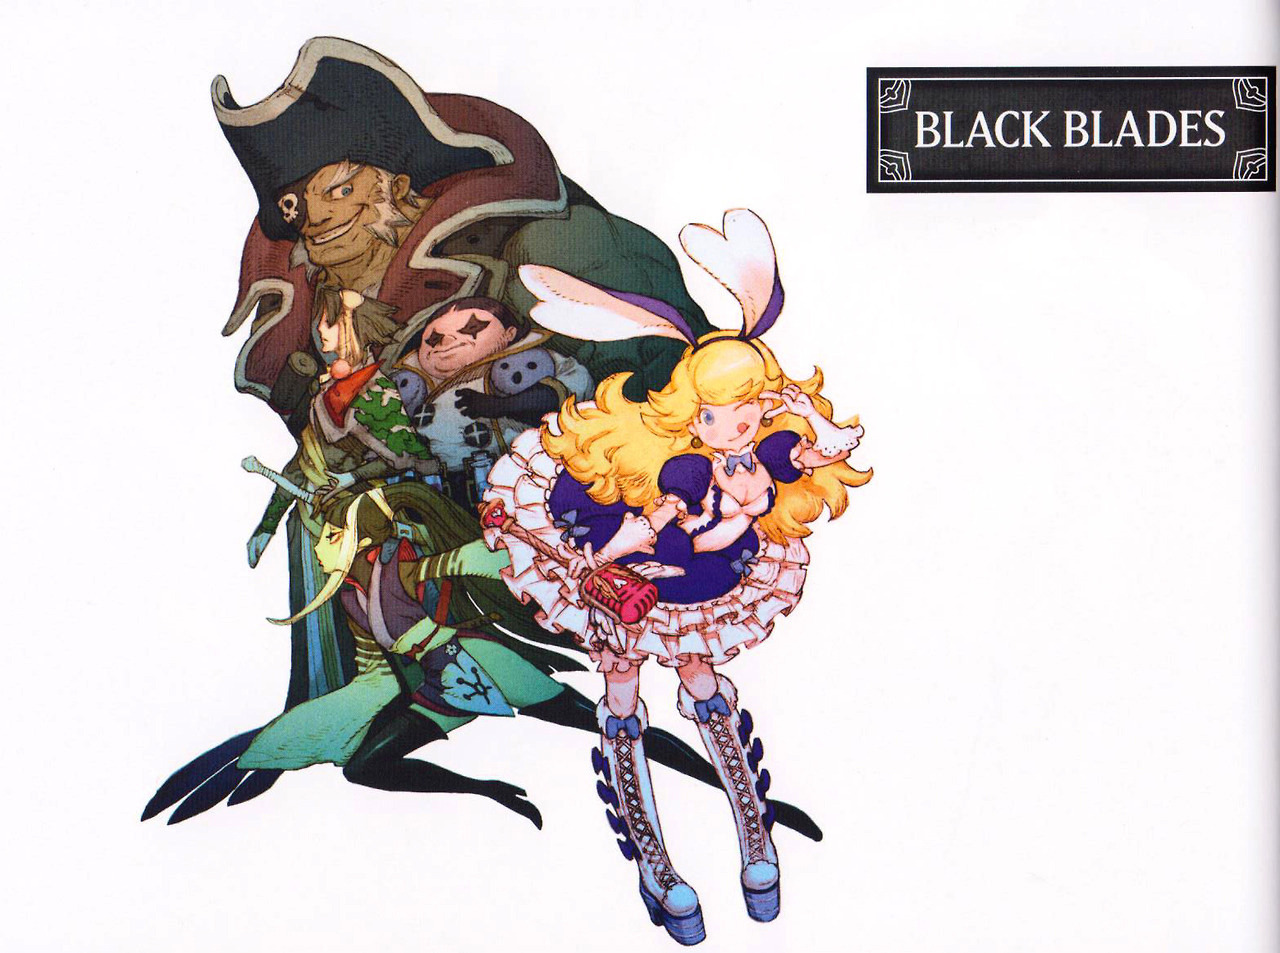 jade-of-impala:  Concept art of the Black Blades scanned from the Bravely Default